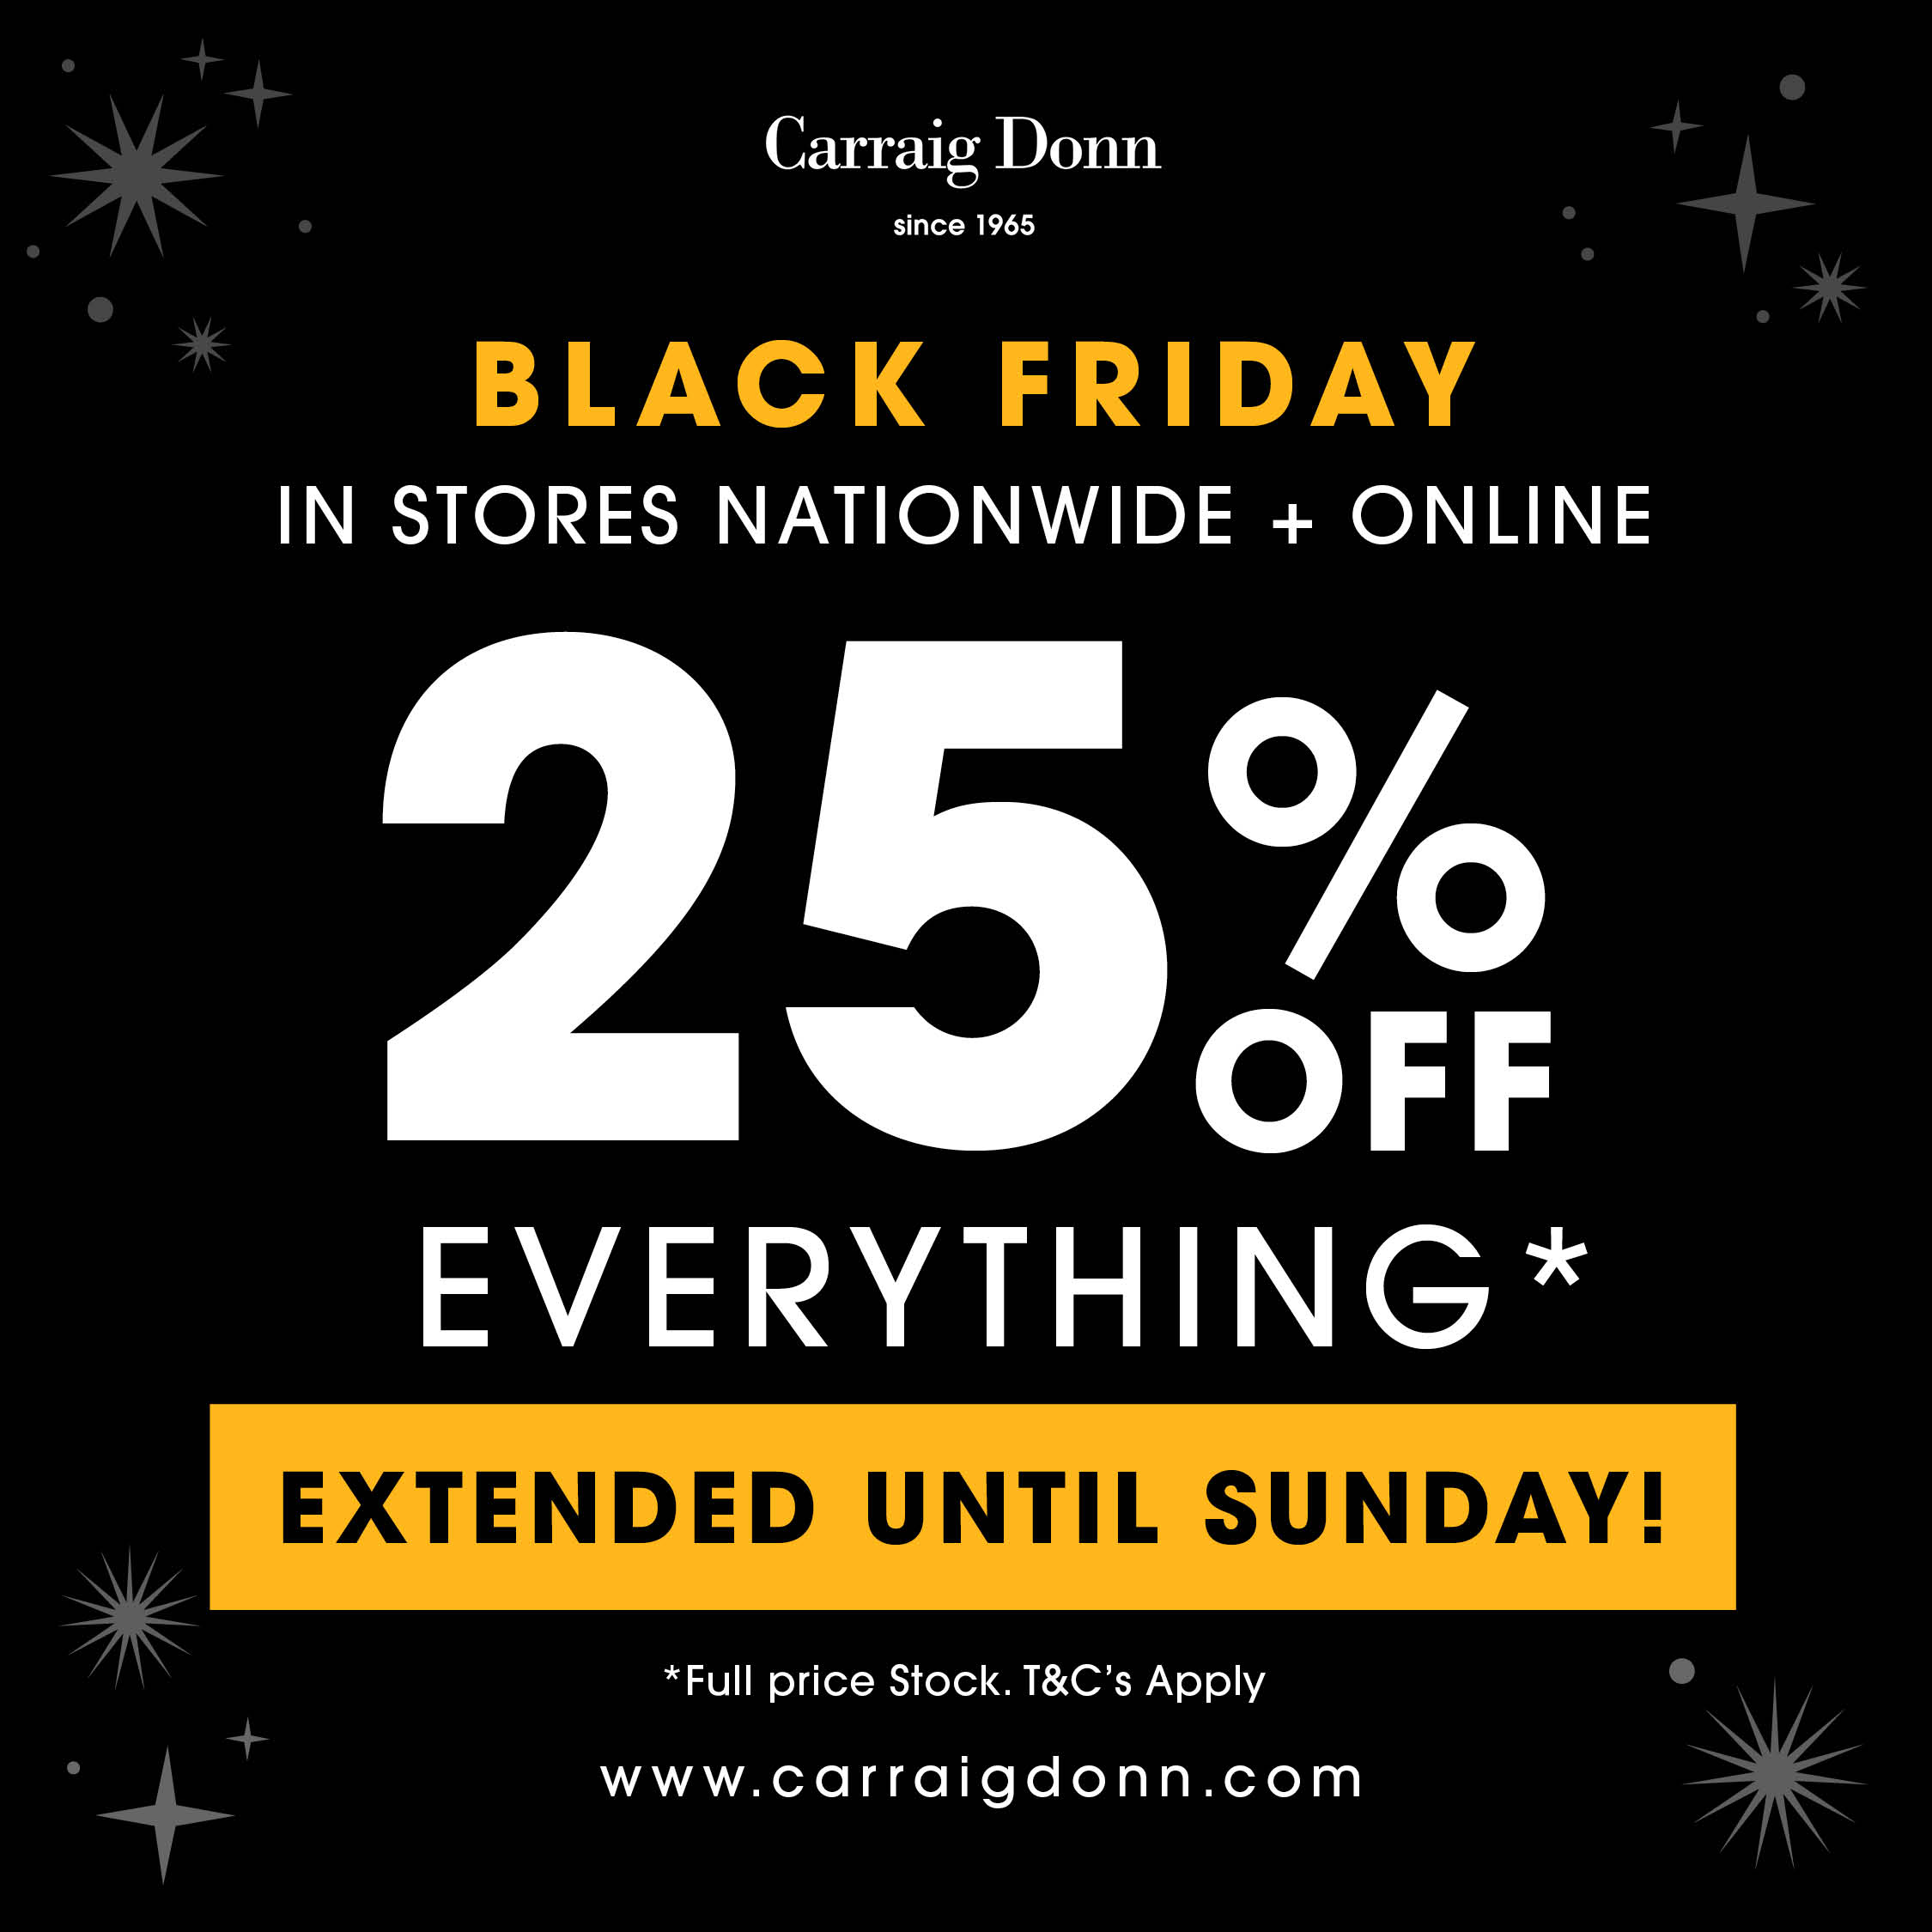 CARRAIG DONN’S 25% OFF EVERYTHING SALE JUST GOT EXTENDED UNTIL SUNDAY!